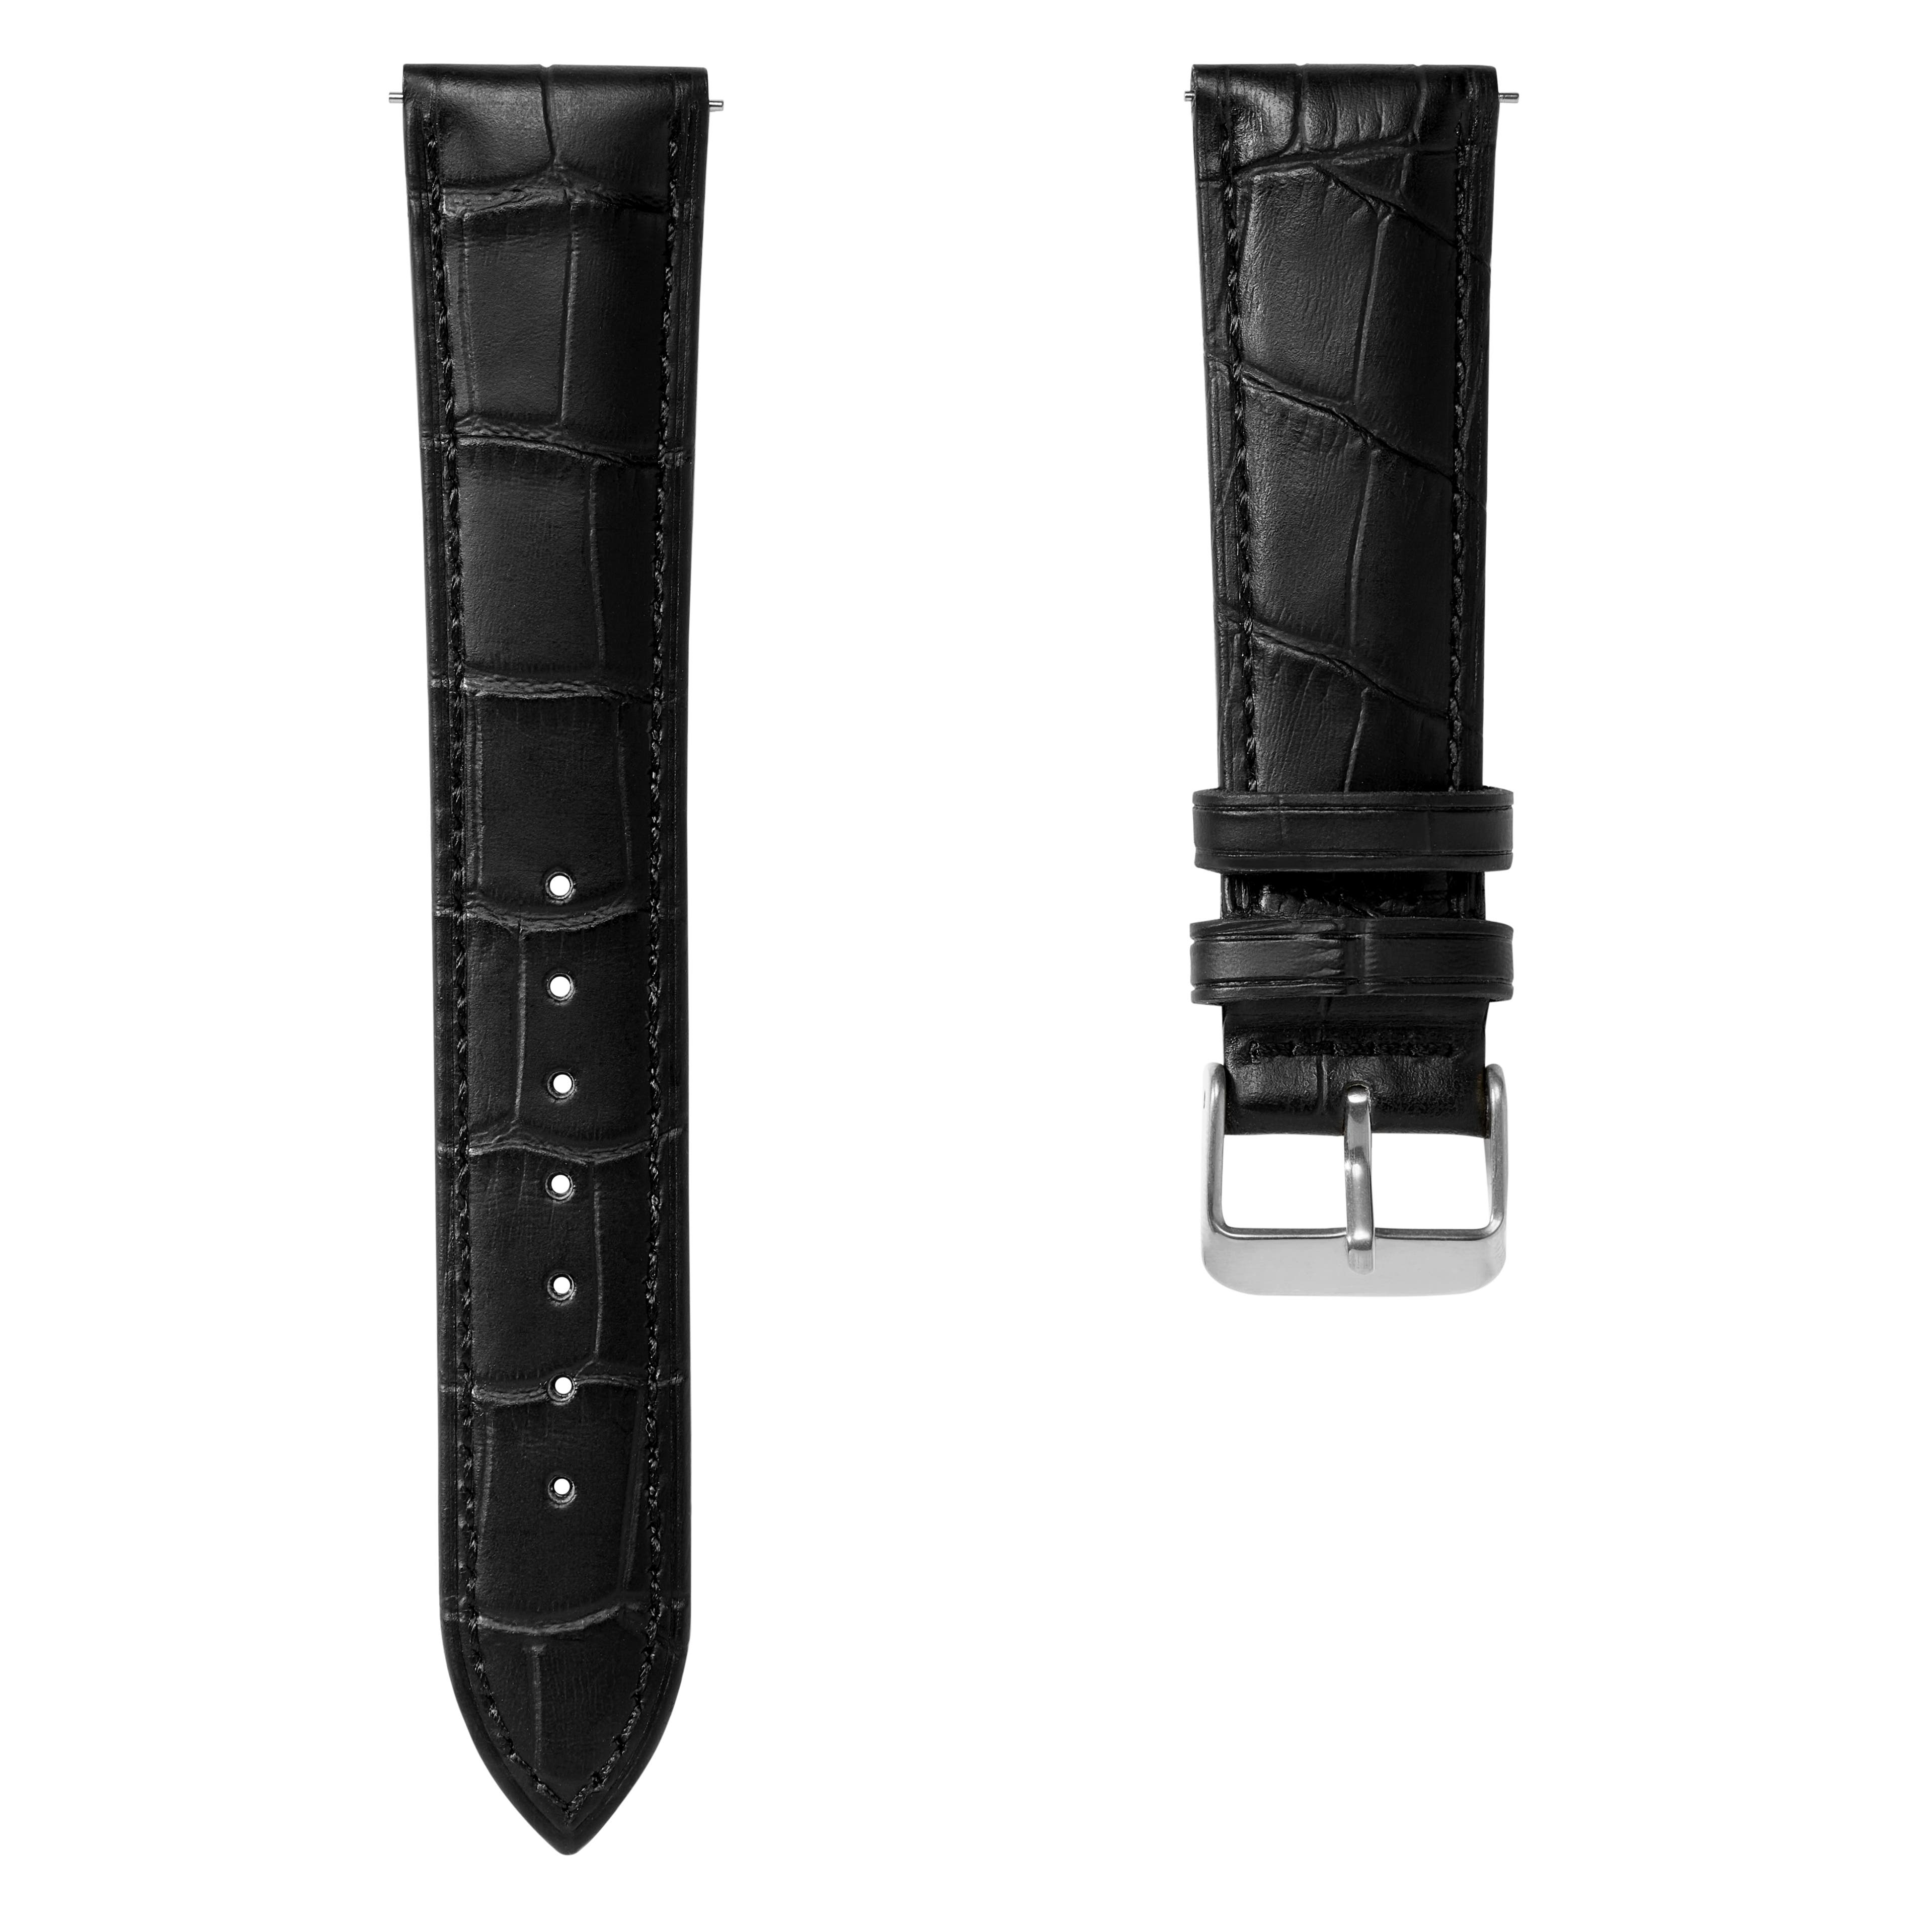 7/8" (22 mm) Crocodile-Embossed Black Leather Watch Strap with Silver-Tone Buckle – Quick Release